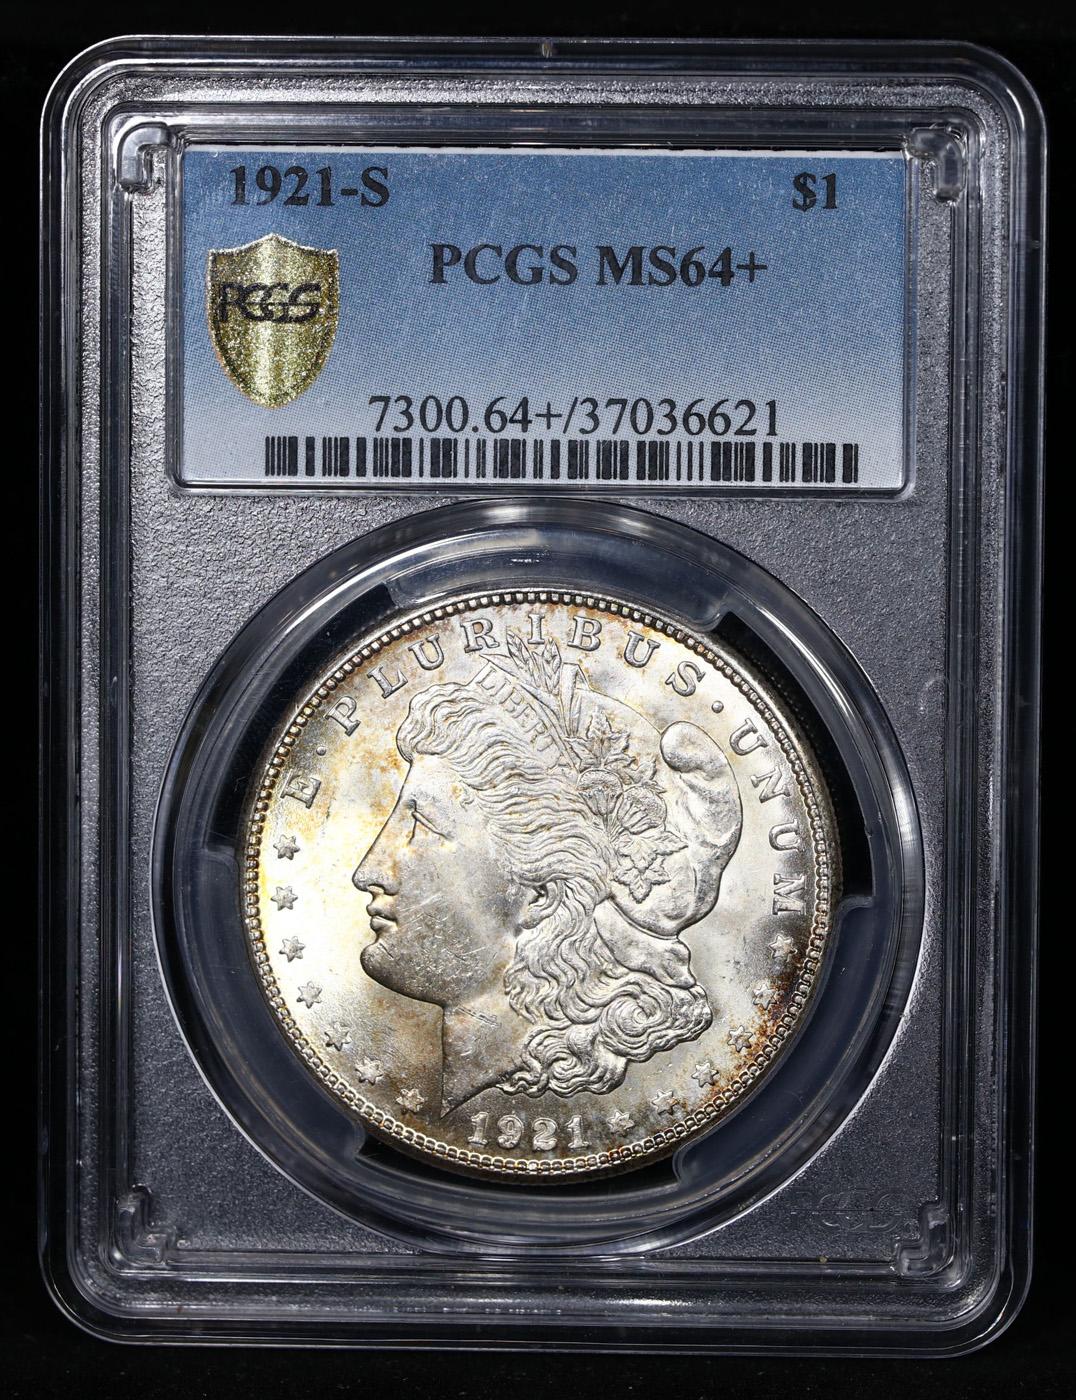 ***Auction Highlight*** PCGS 1921-s Morgan Dollar $1 Graded ms64+ By PCGS (fc)